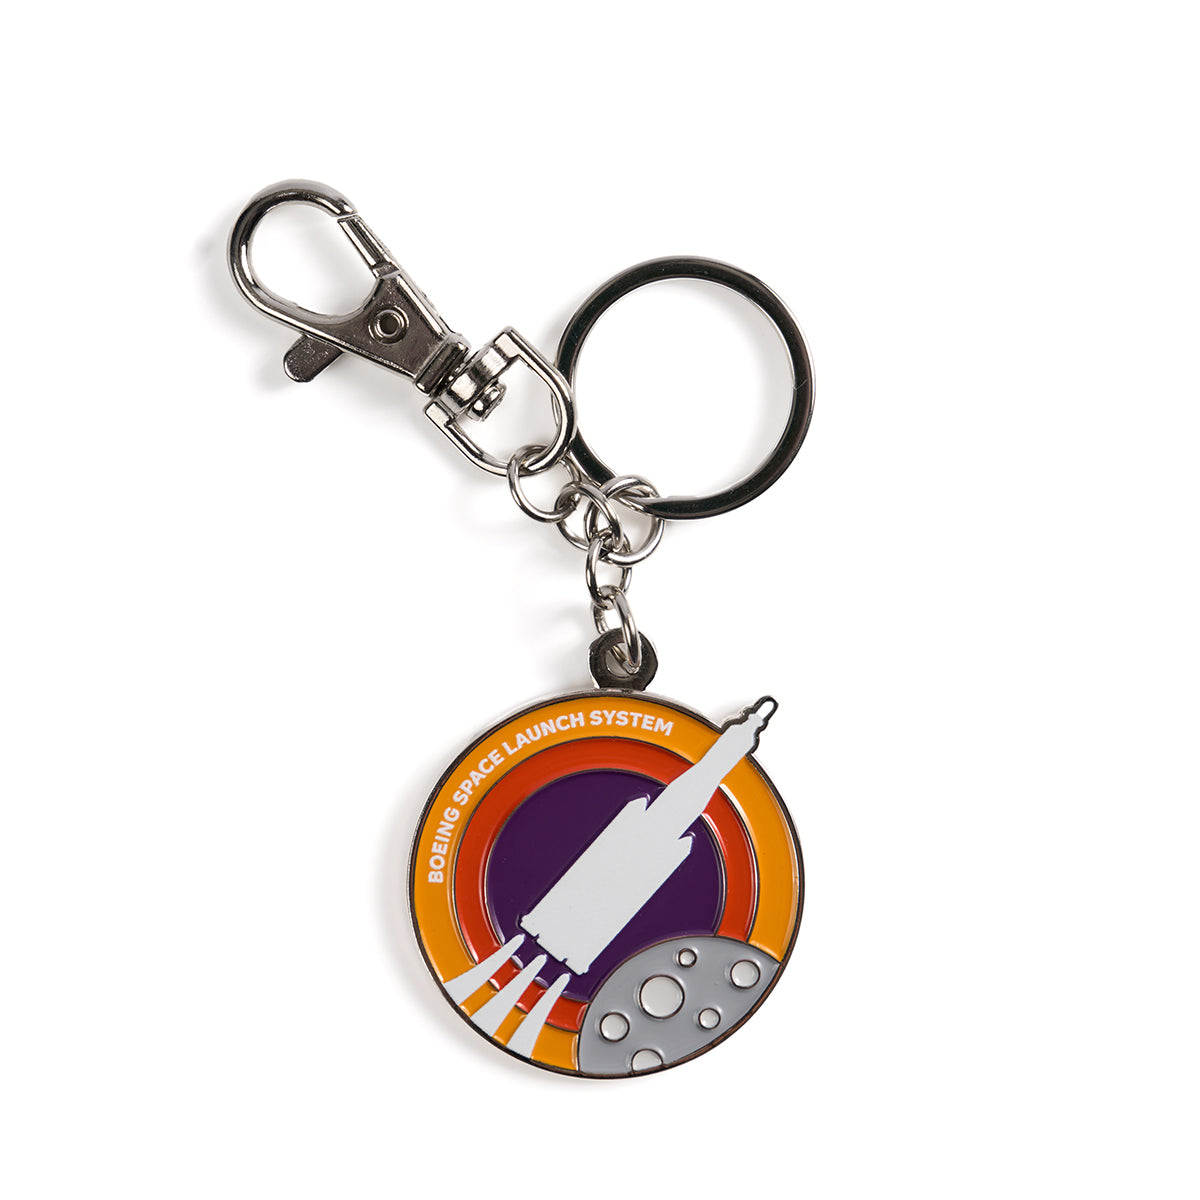 Skyward keychain, featuring the iconic Boeing Space Launch System in a roundel design.